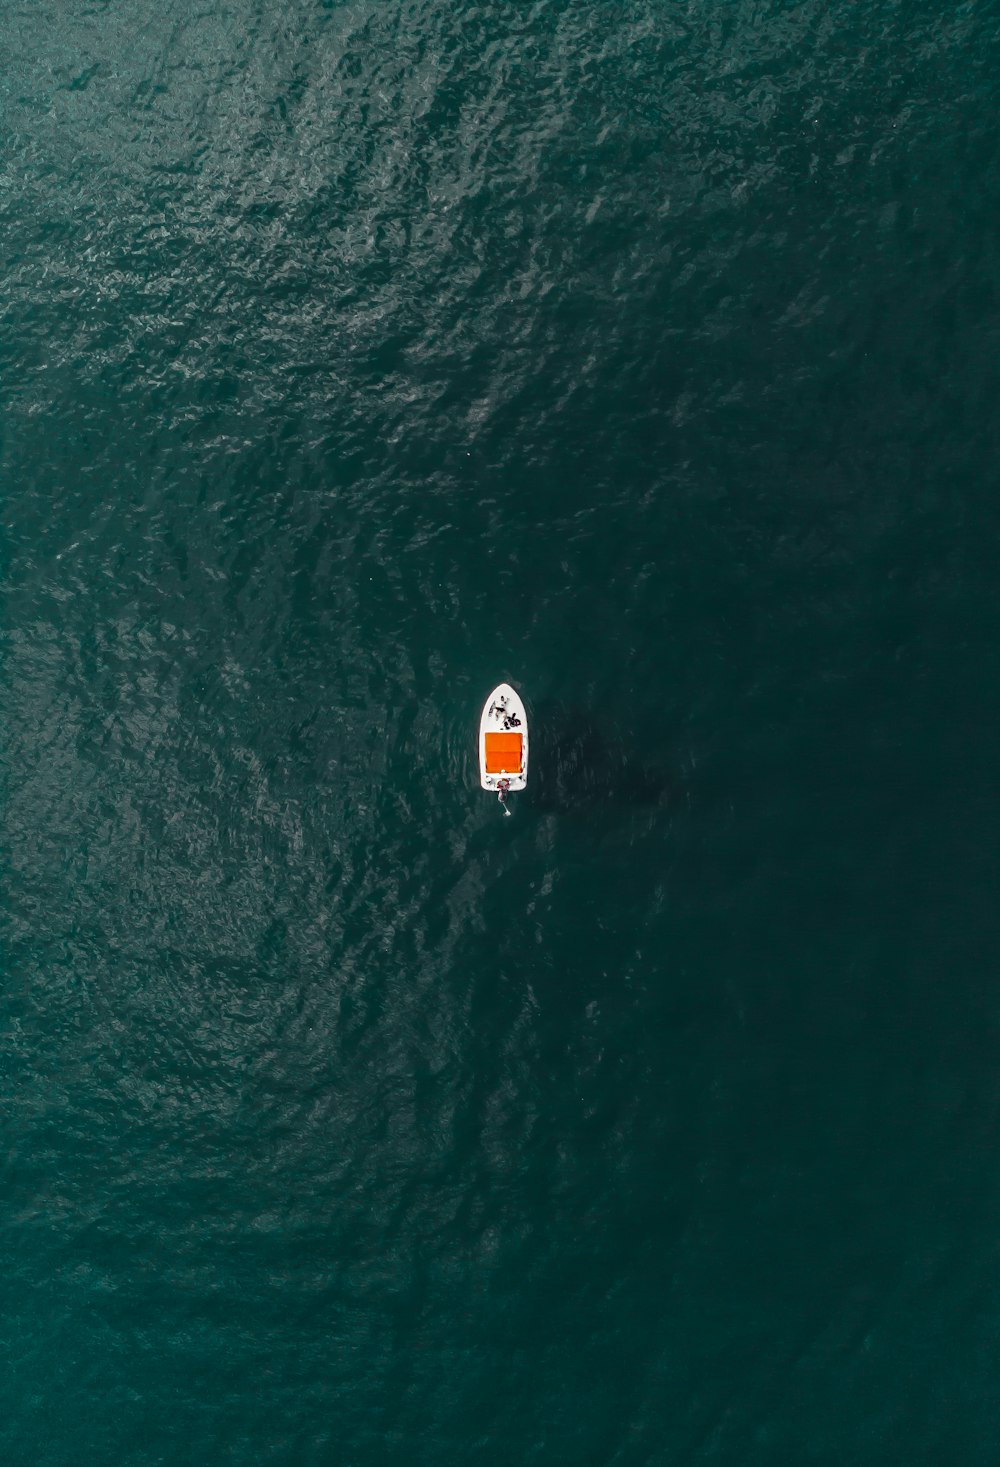 white and orange sailboat in the middle of ocean